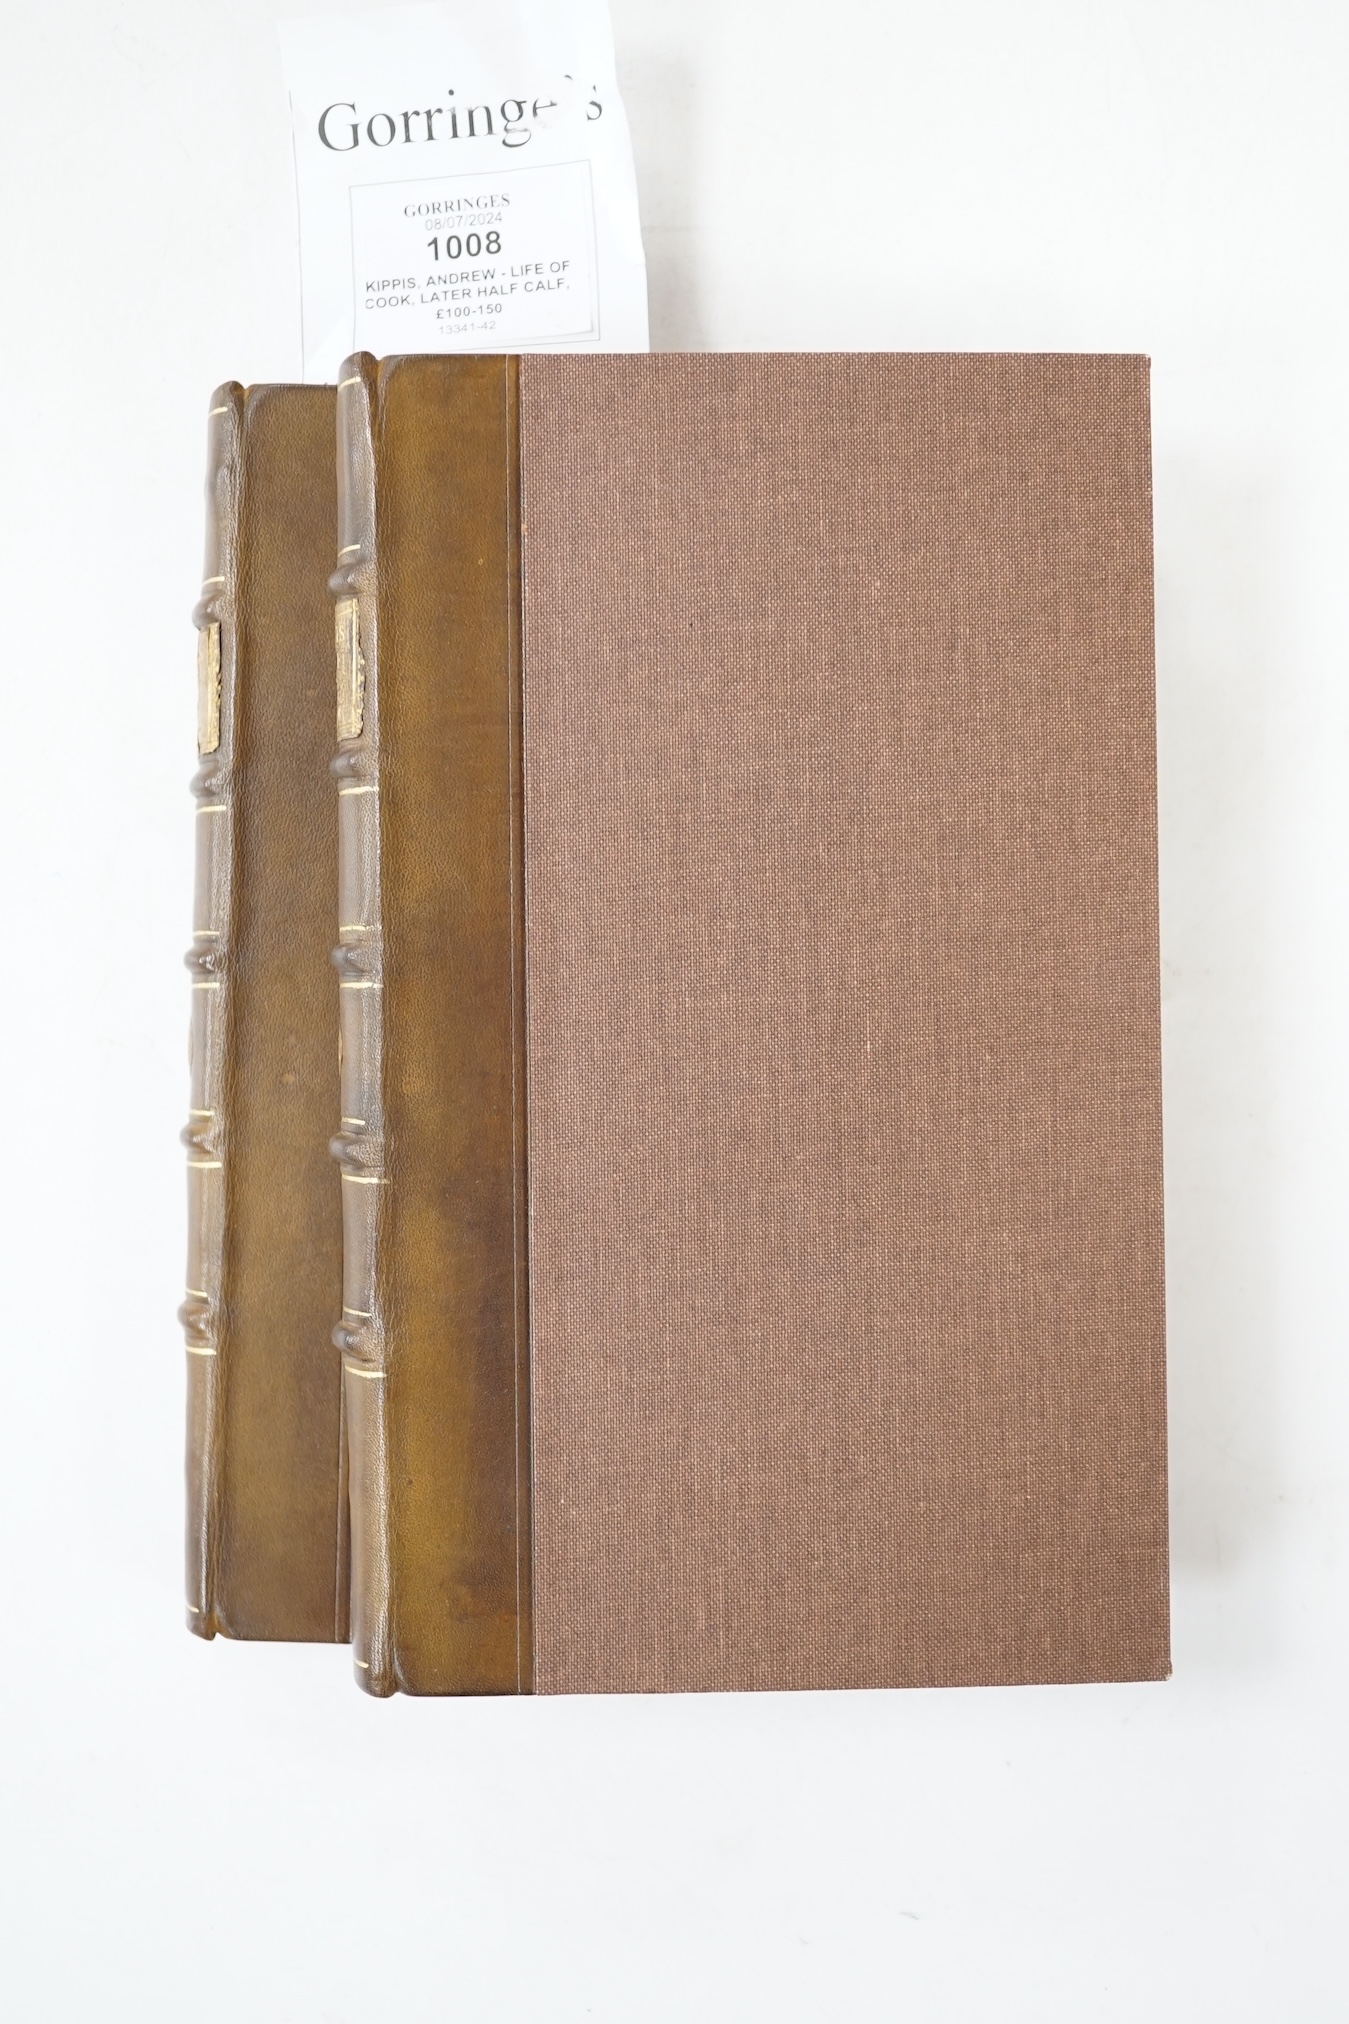 Kippis, Andrew - The Life of Captain James Cook. 2 vols. newly rebound quarter calf and cloth, gilt panelled spines. Basil printed by J.J. Tourneisen, 1788